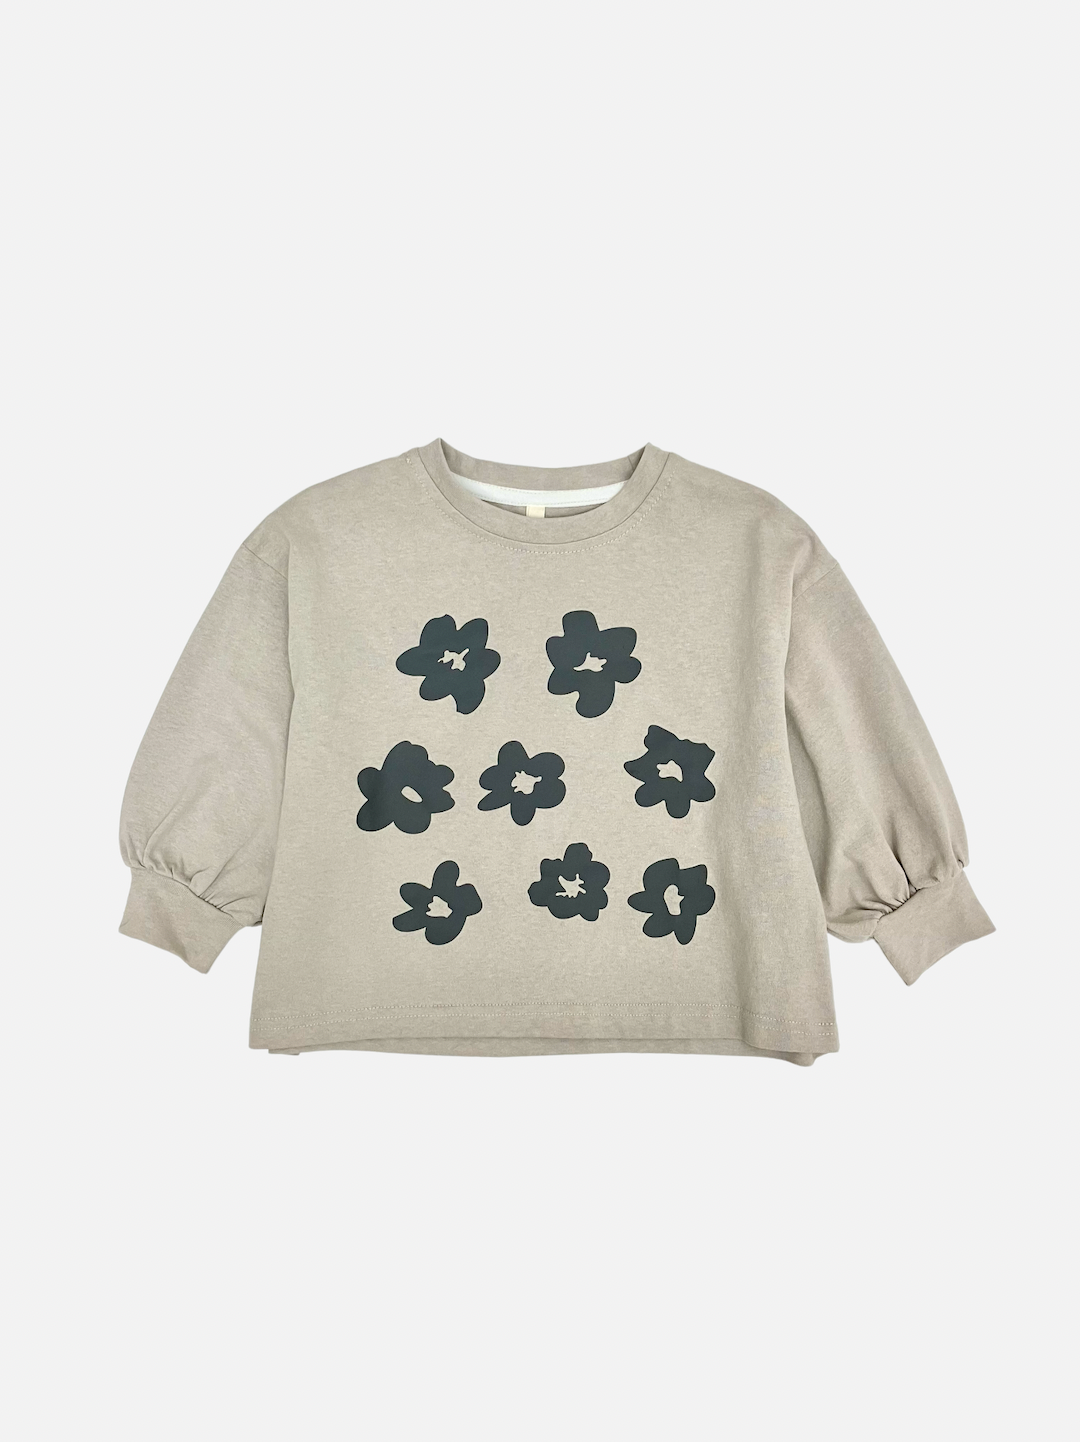 A soft gray kids' tee shirt with a pattern of dark gray flowers, sleeves gathered at the cuffs, front view